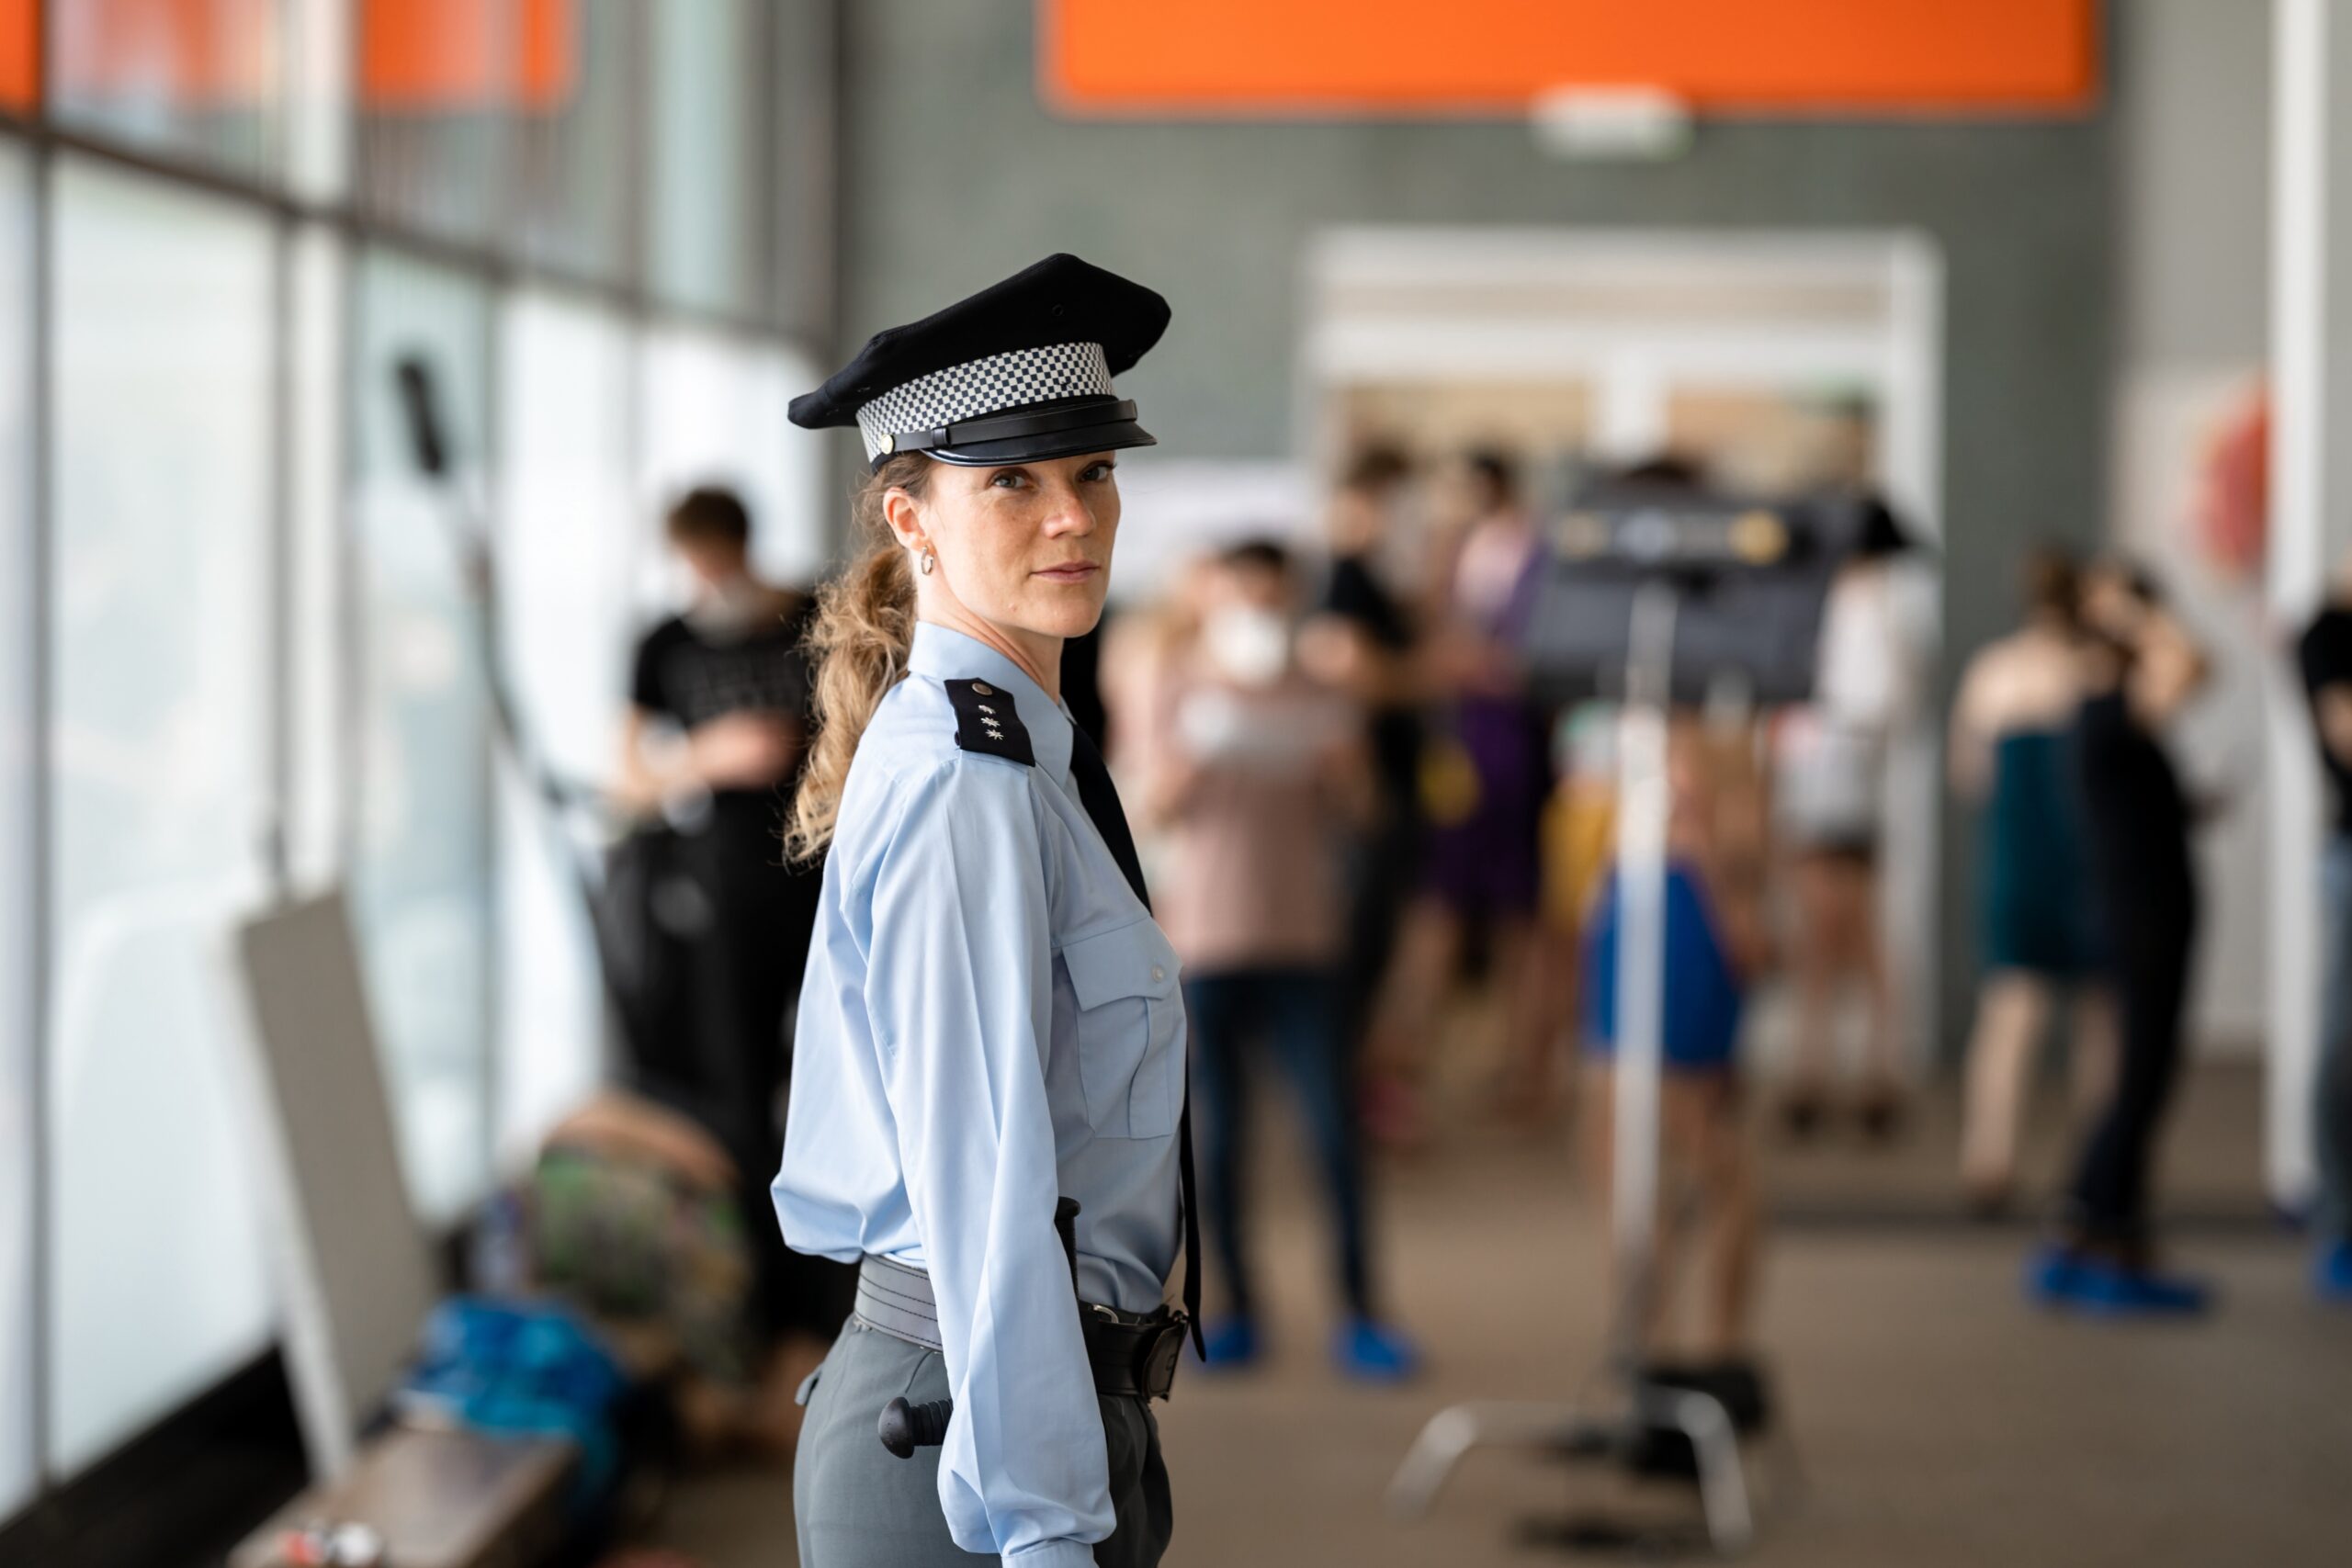 female police officer in uniform on duty during a public event.